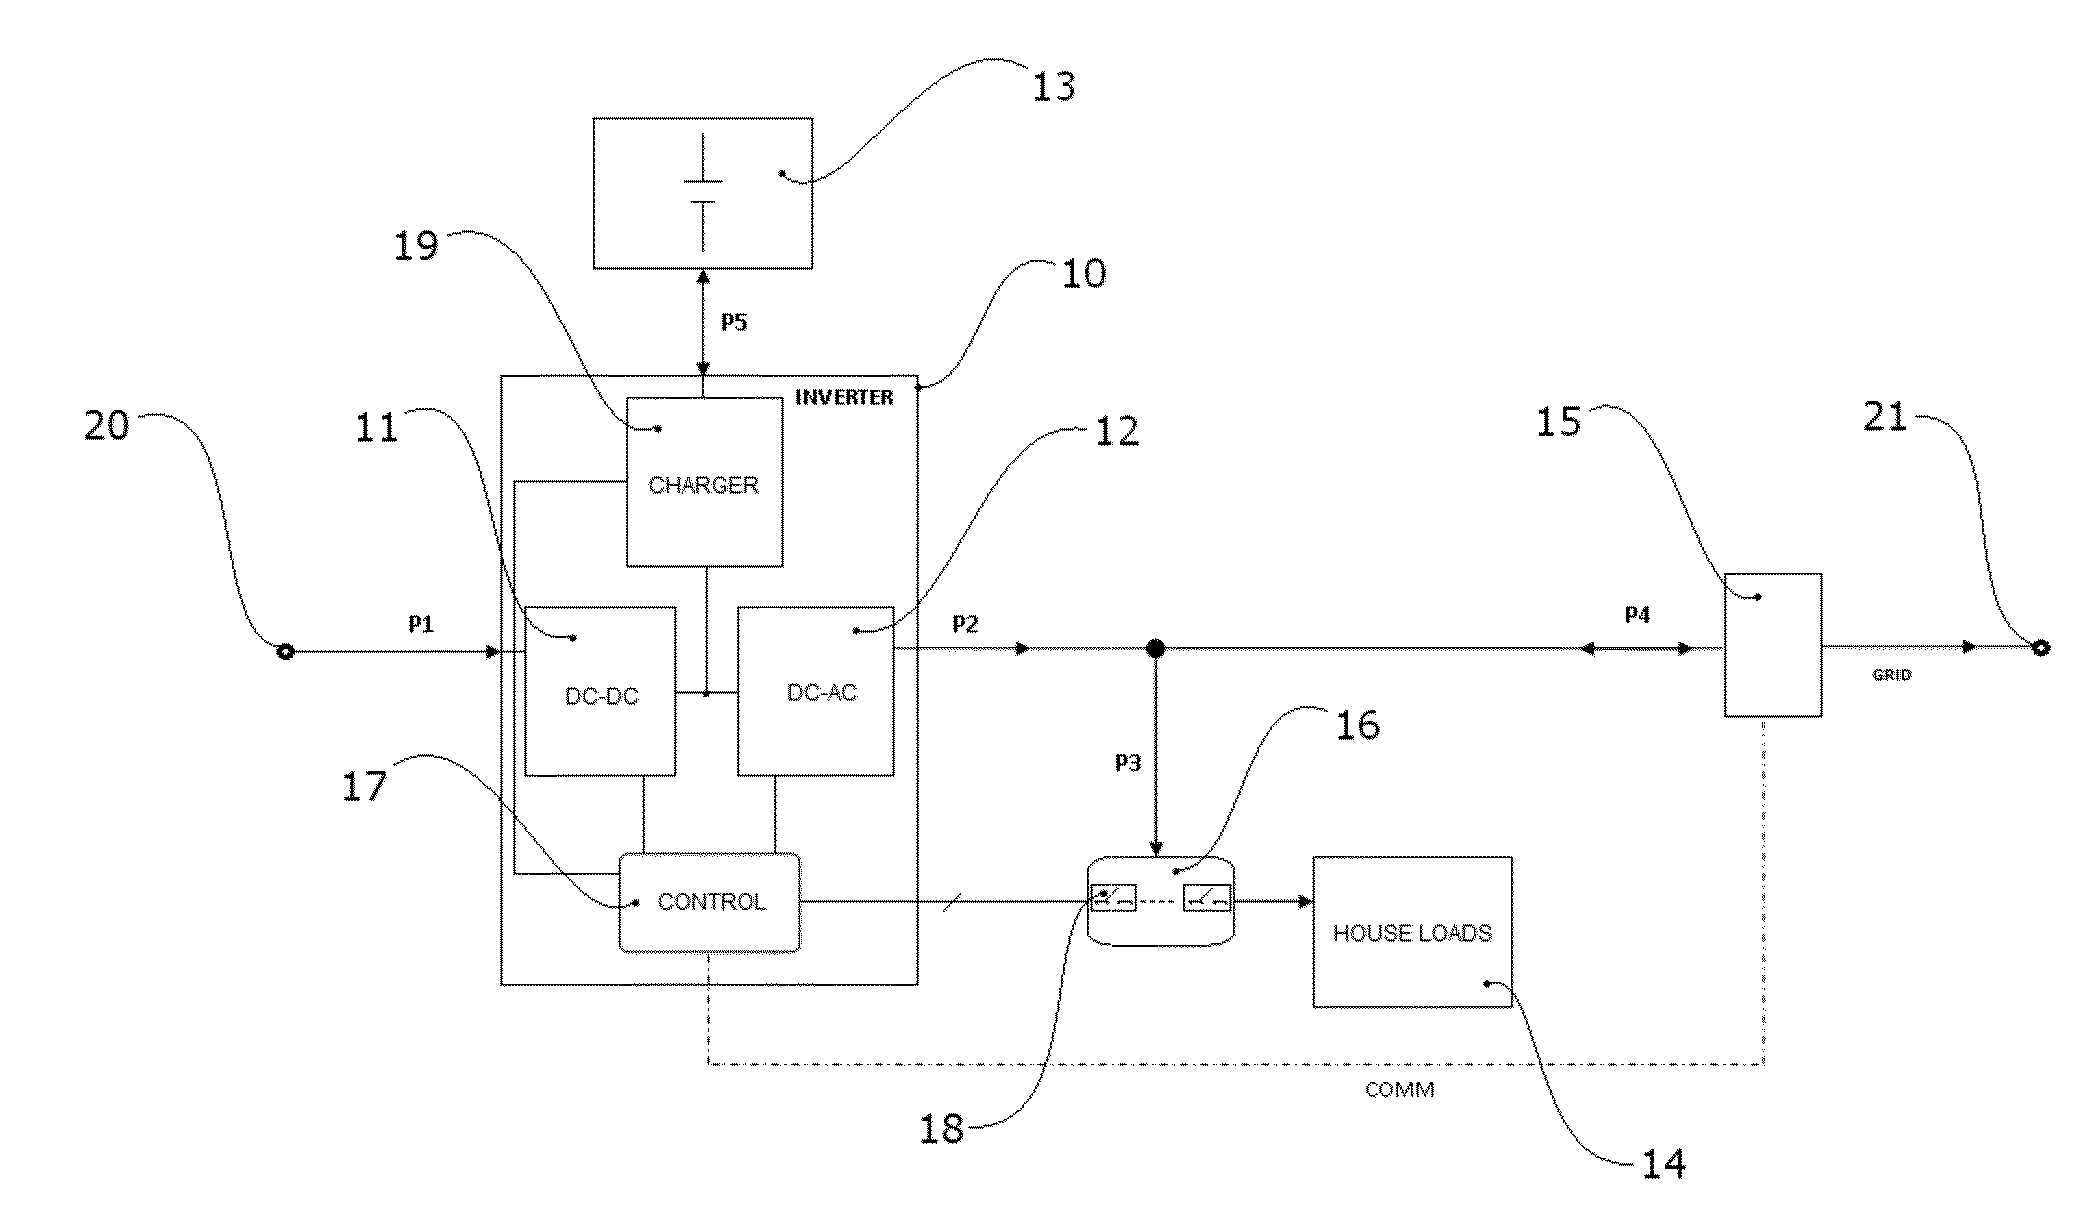 Apparatus for the conversion and optimized consumption management of power from renewable sources